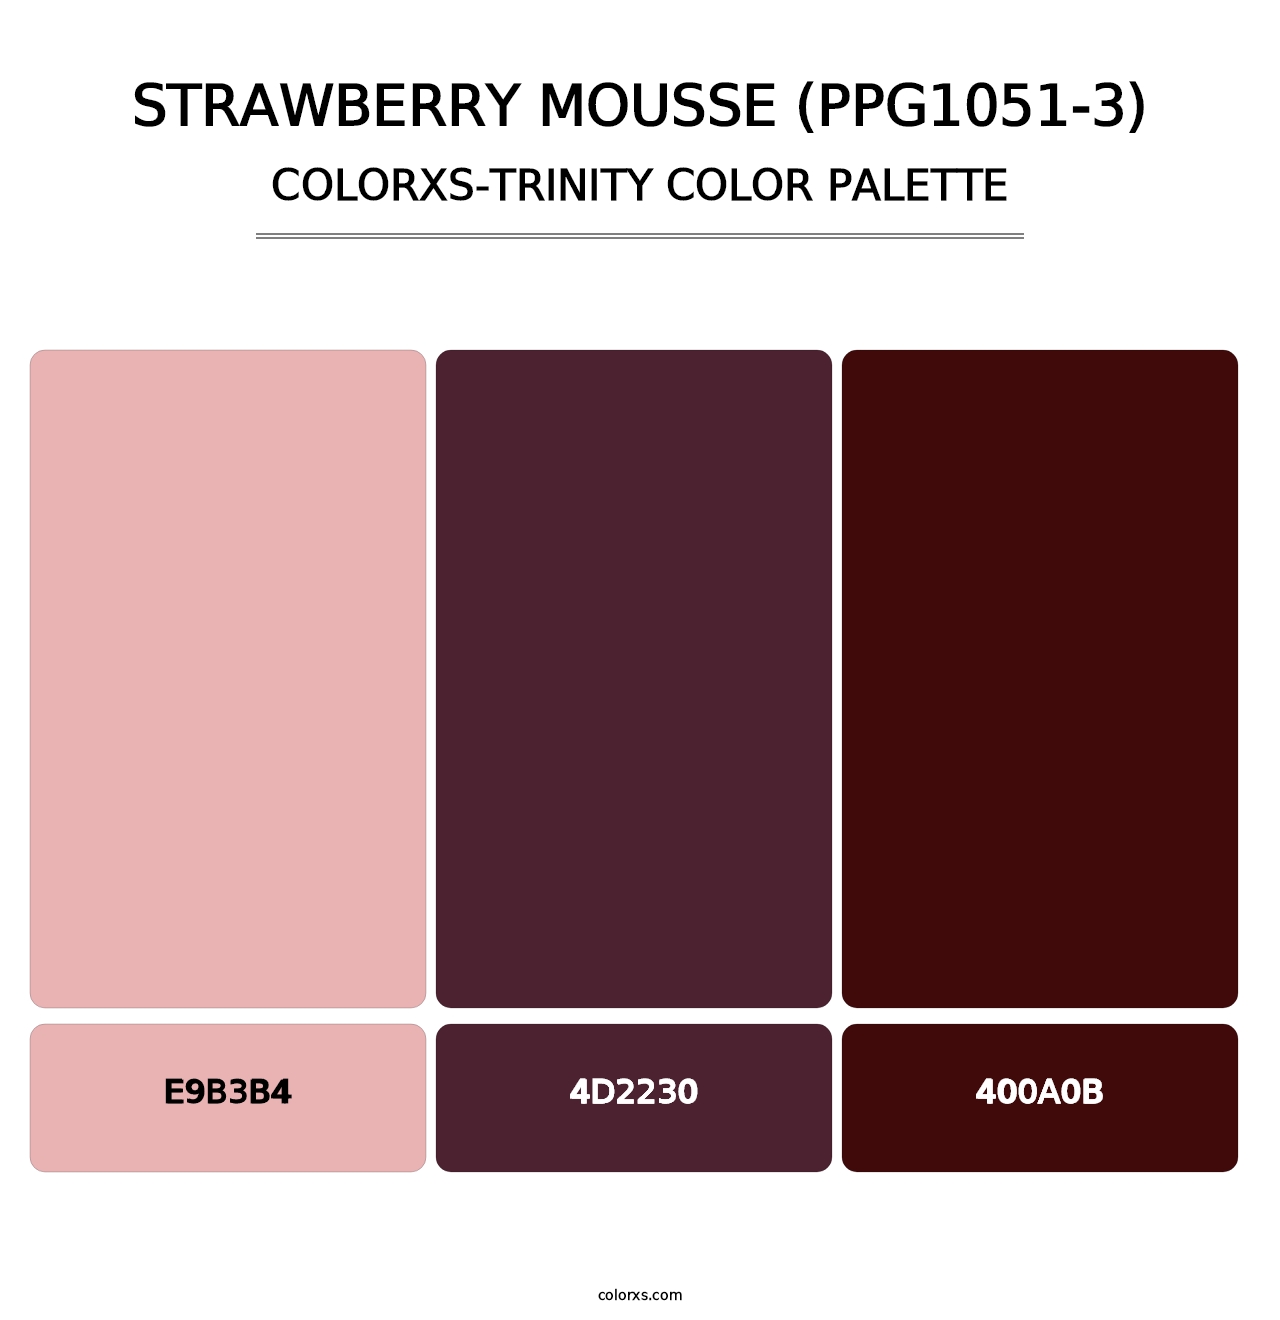 Strawberry Mousse (PPG1051-3) - Colorxs Trinity Palette